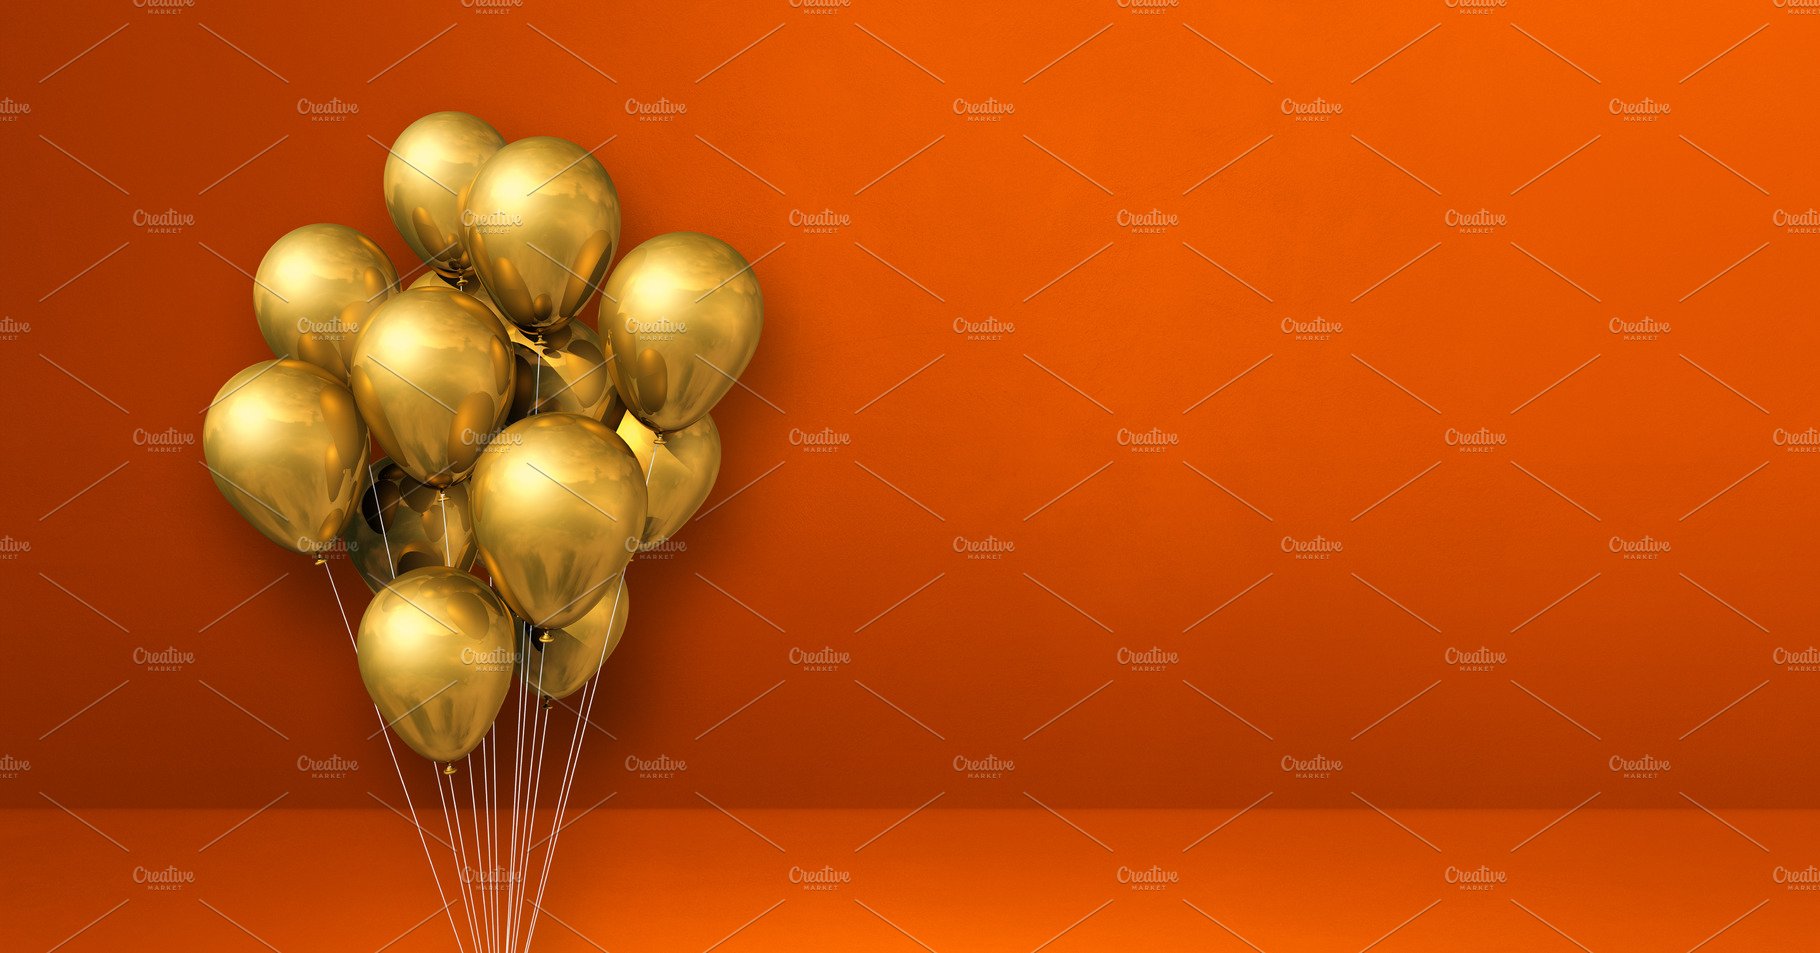 Gold balloons bunch on orange wall background. Horizontal banner cover image.